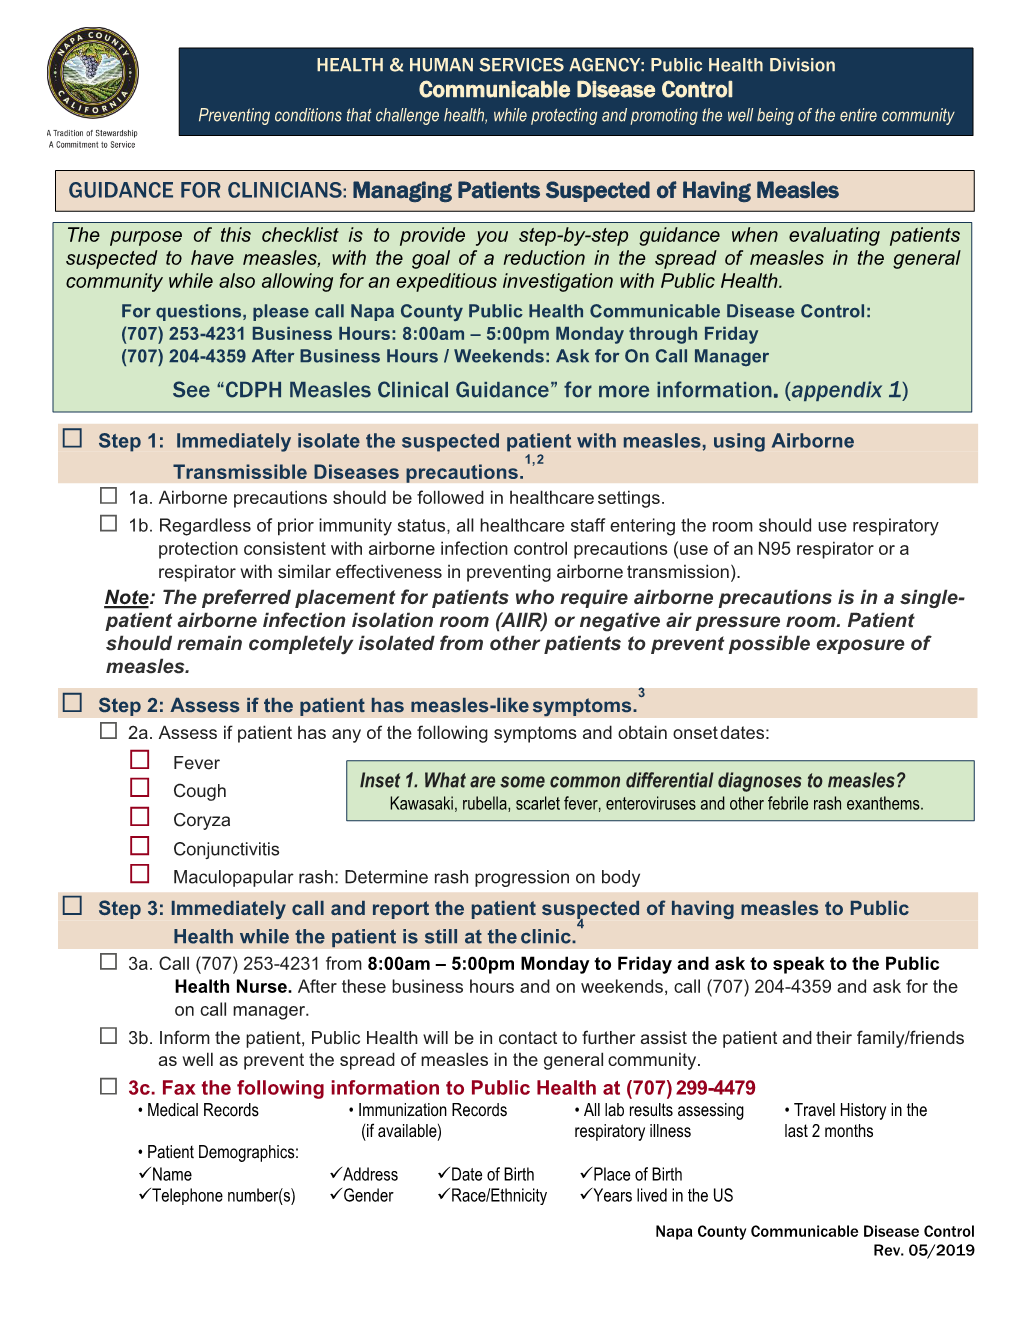 Communicable Disease Control See “CDPH Measles Clinical Guidance”